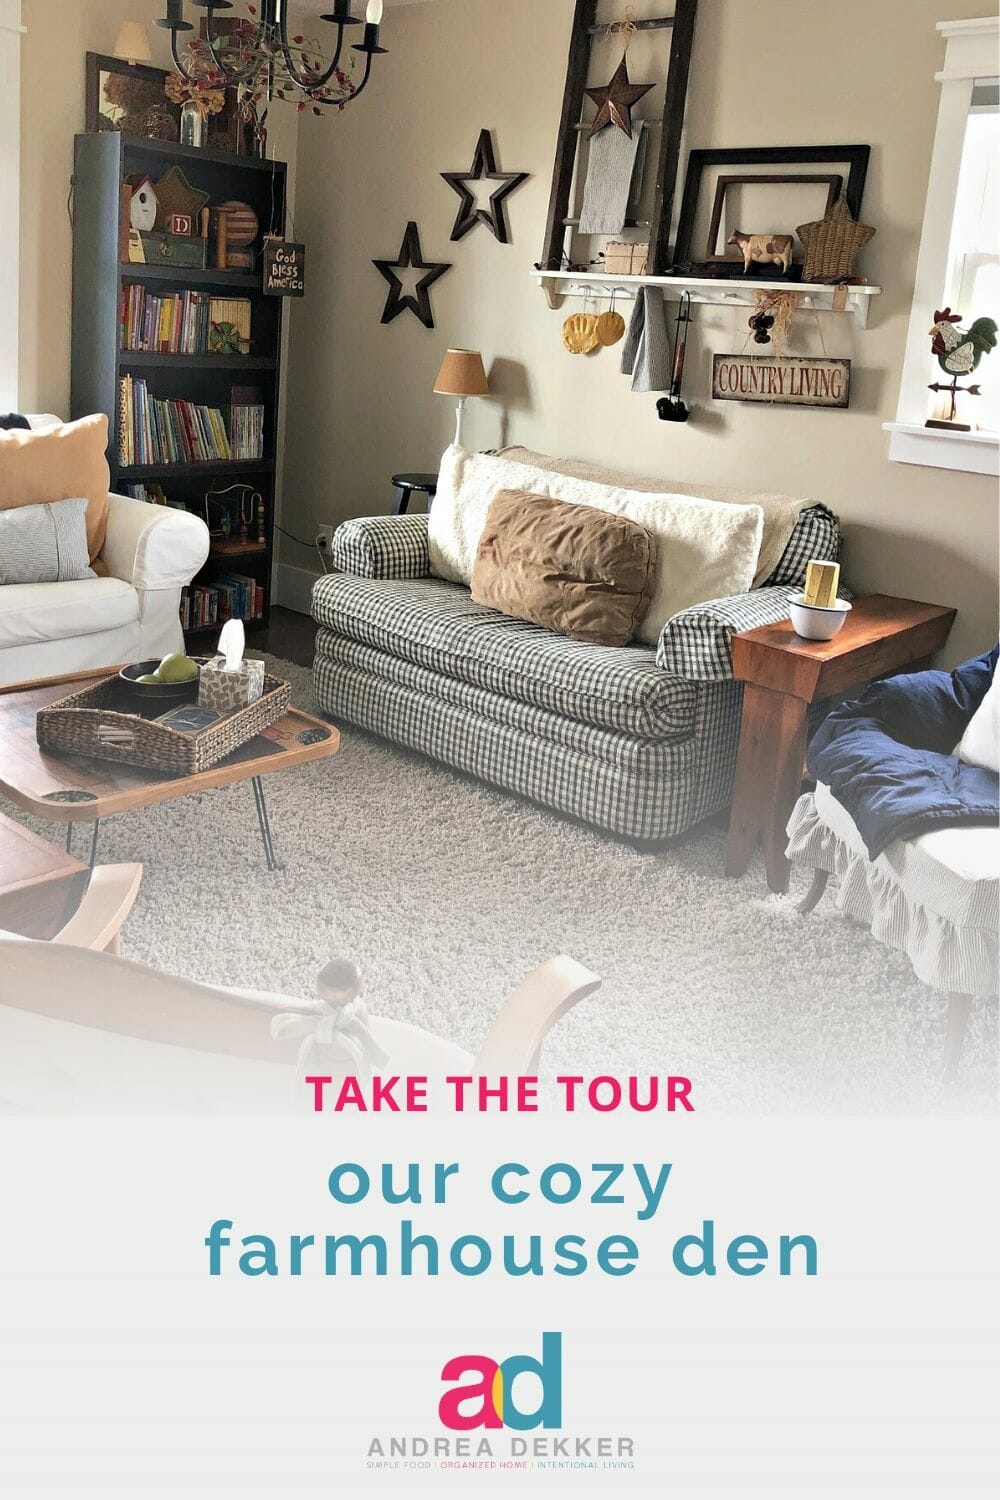 From master bedroom to cozy farmhouse den -- check out this amazing (and super frugal) transformation! via @andreadekker